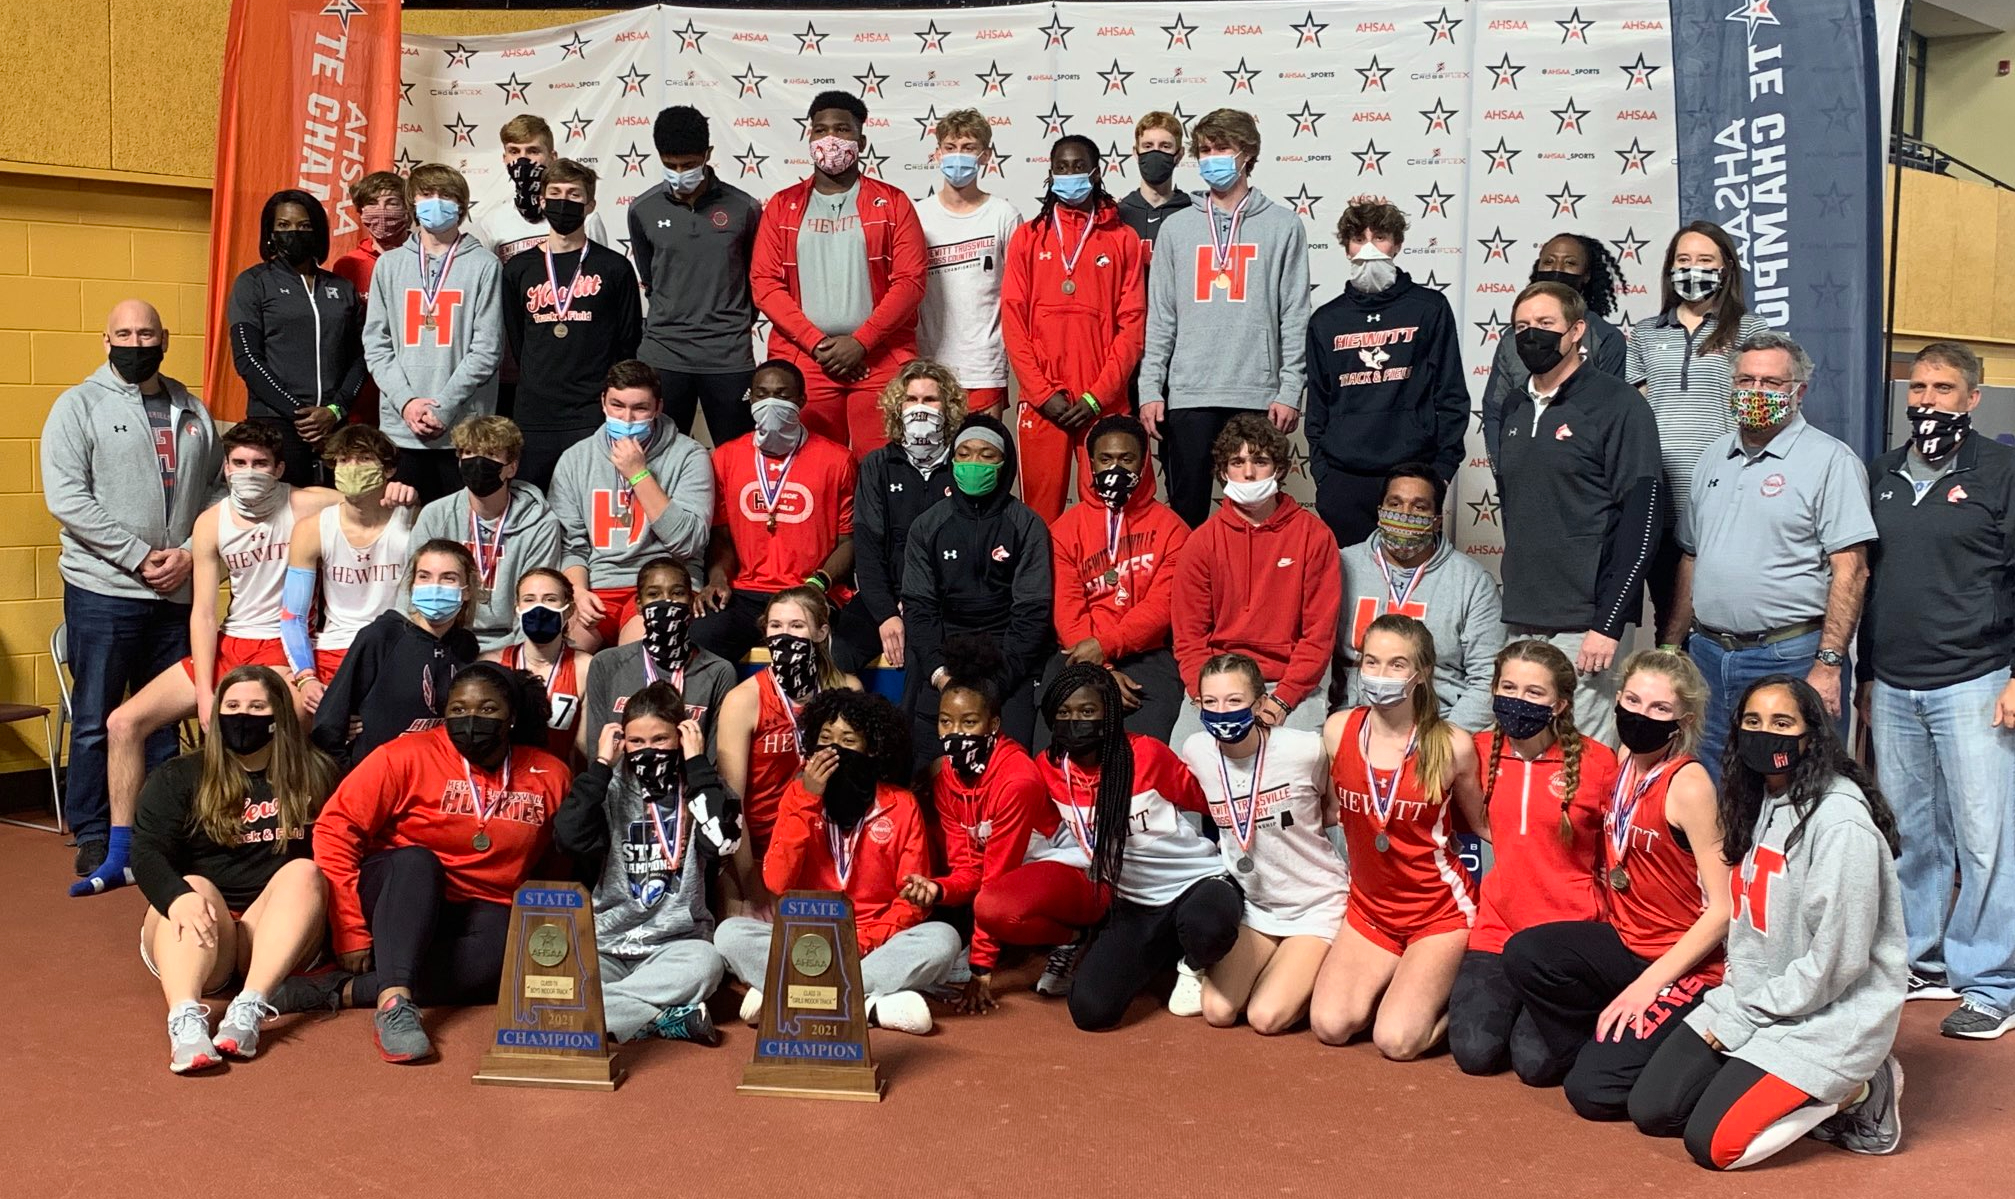 Hewitt-Trussville sweeps Boys’ and Girls’ 7A State Indoor Track Championships